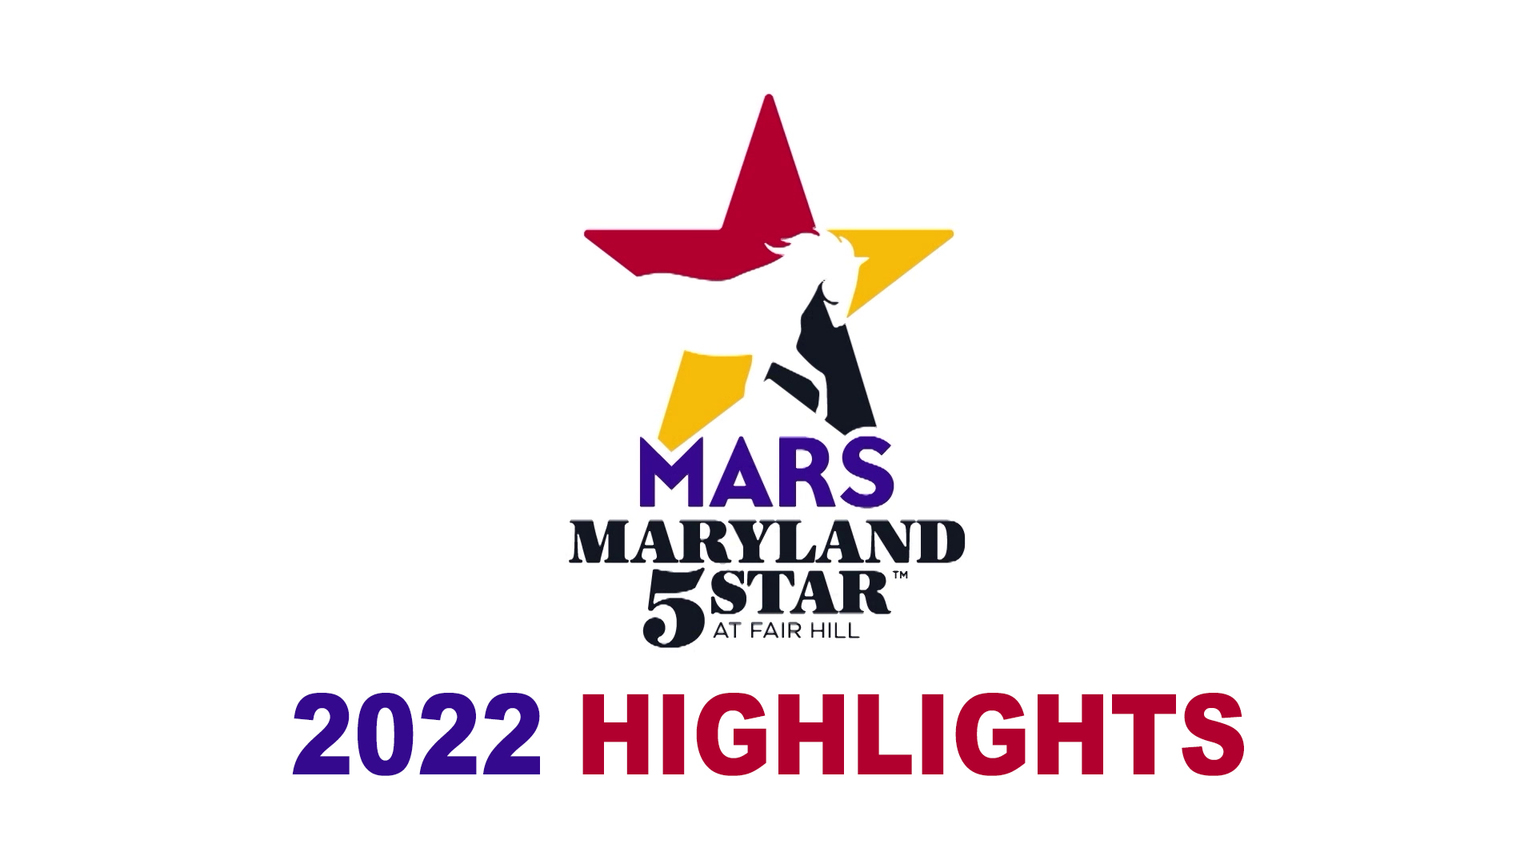 MARS Maryland 5* at Fair Hill presented by Brown Advisory 2022